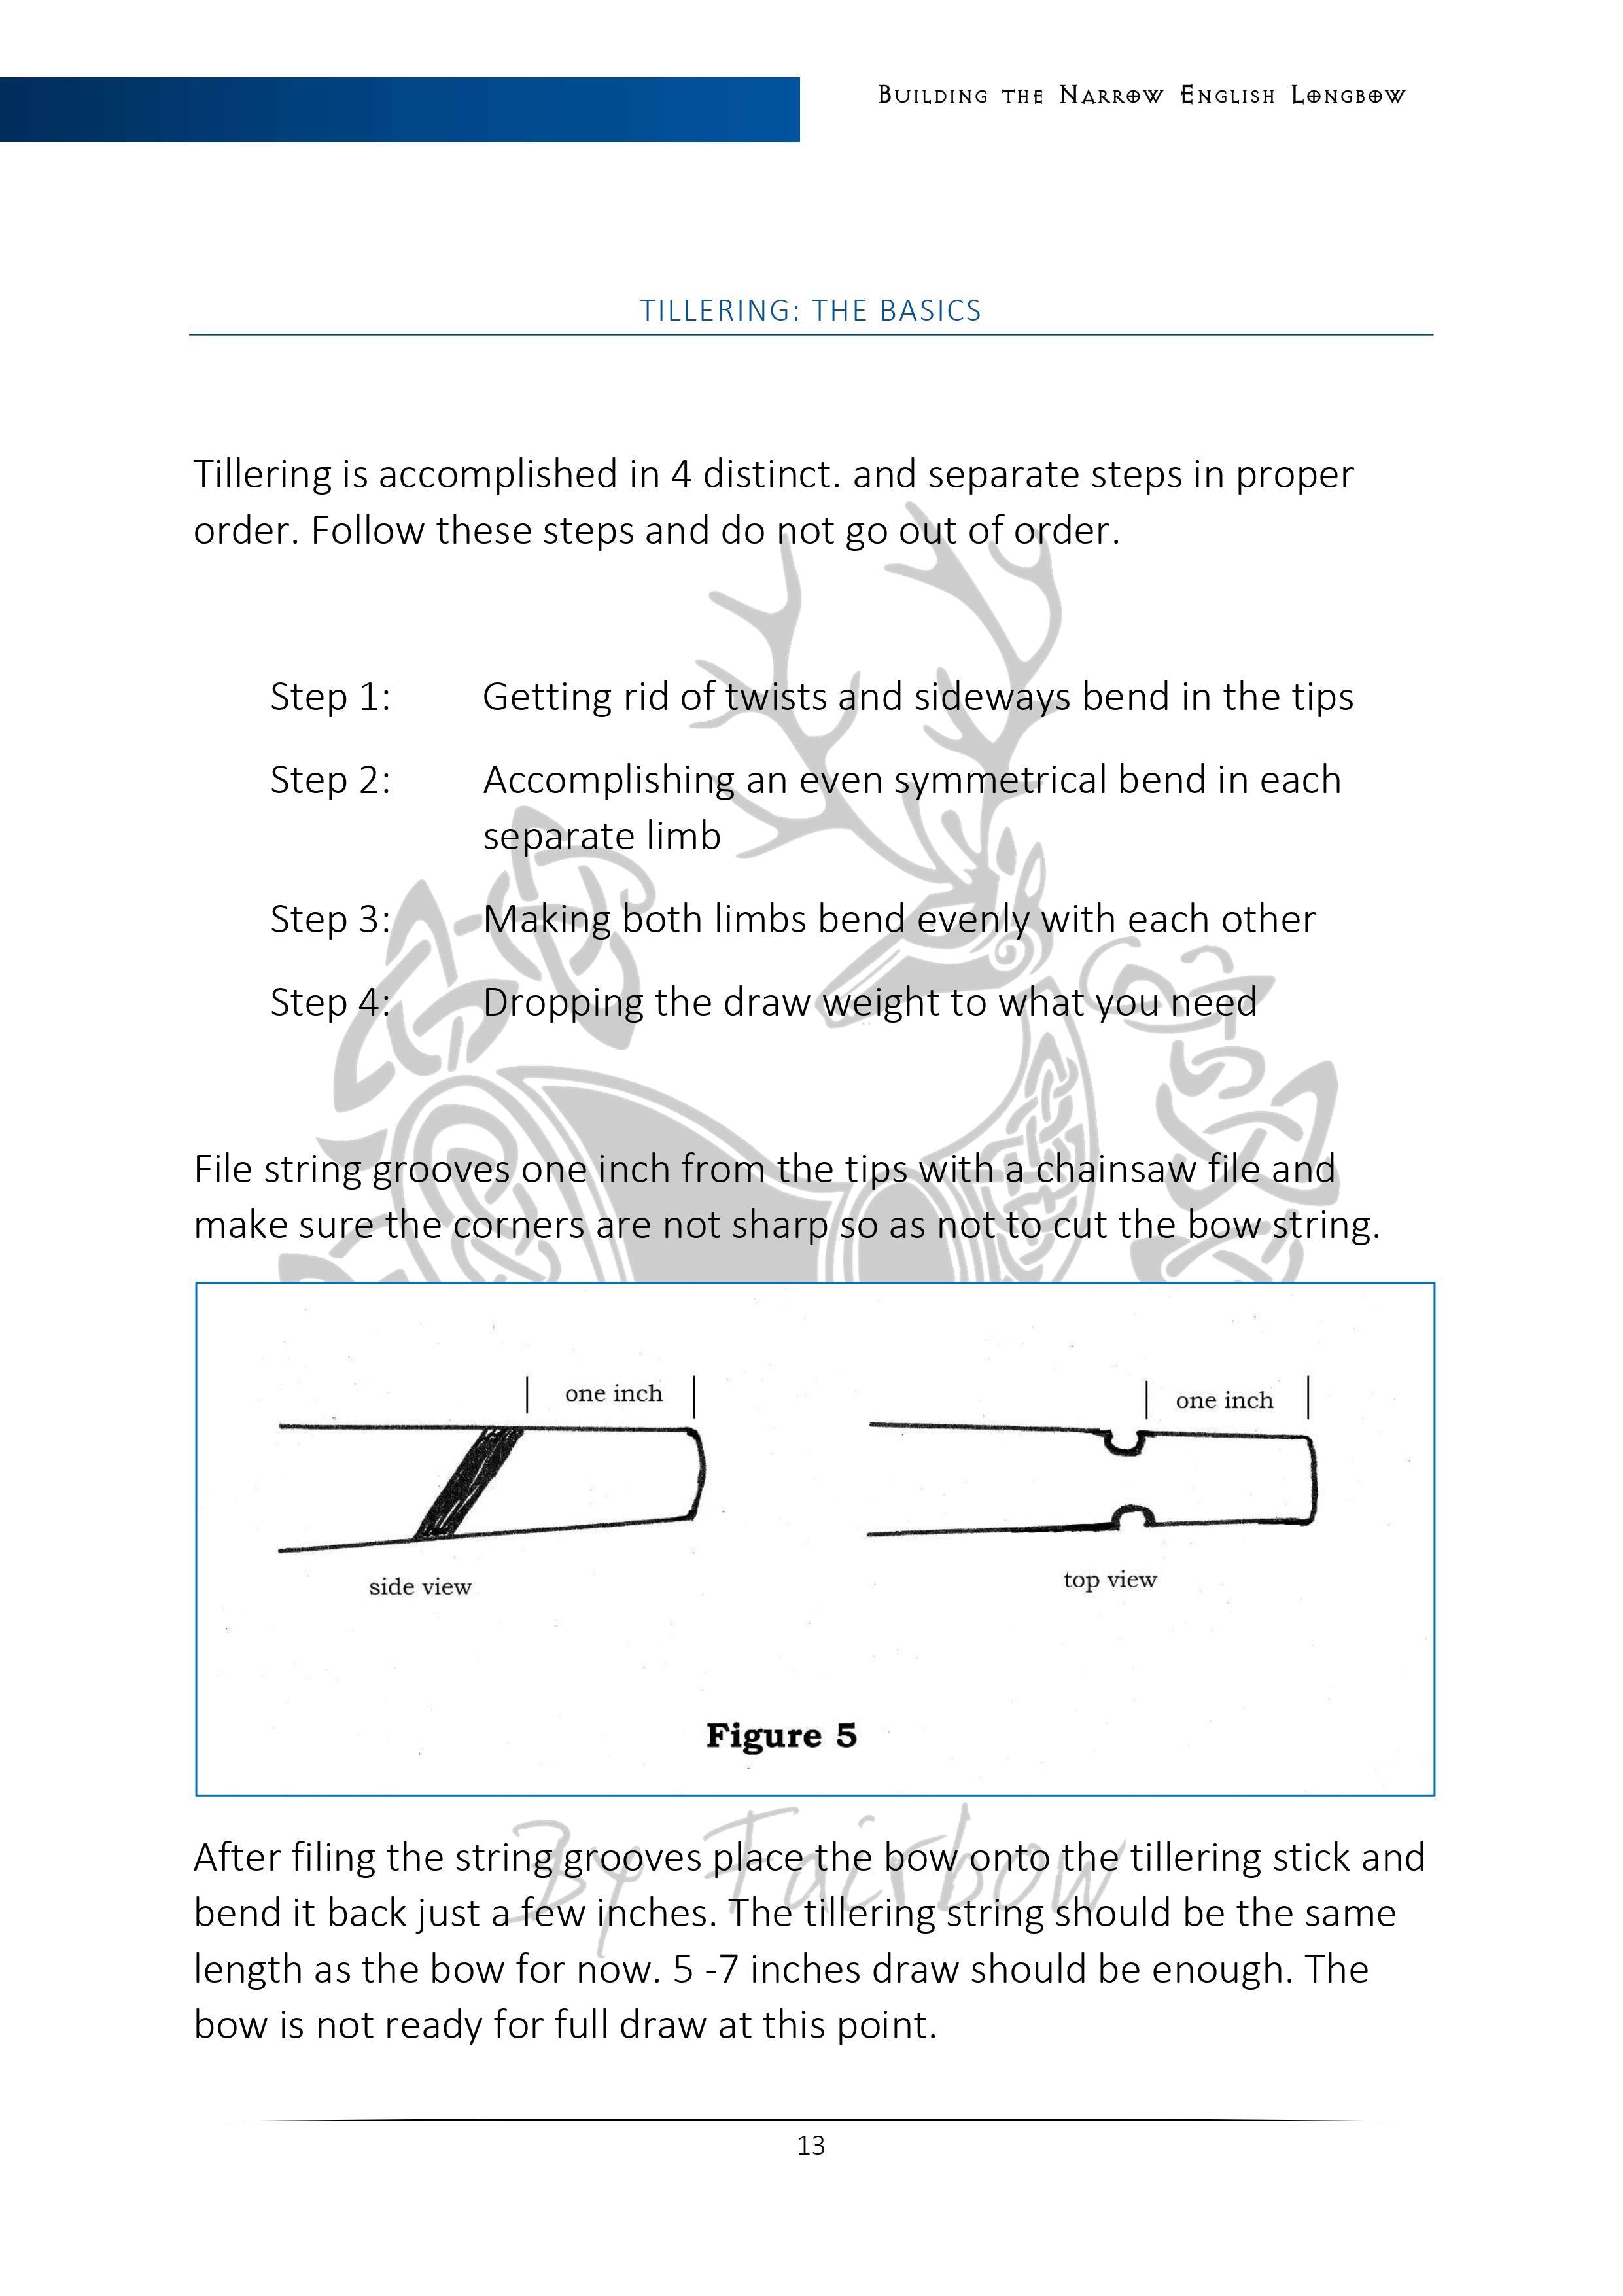 NARROW ENGLISH LONG BOW BUILDING INSTRUCTIONS MADE SIMPLE-Book-Fairbow-English-Fairbow